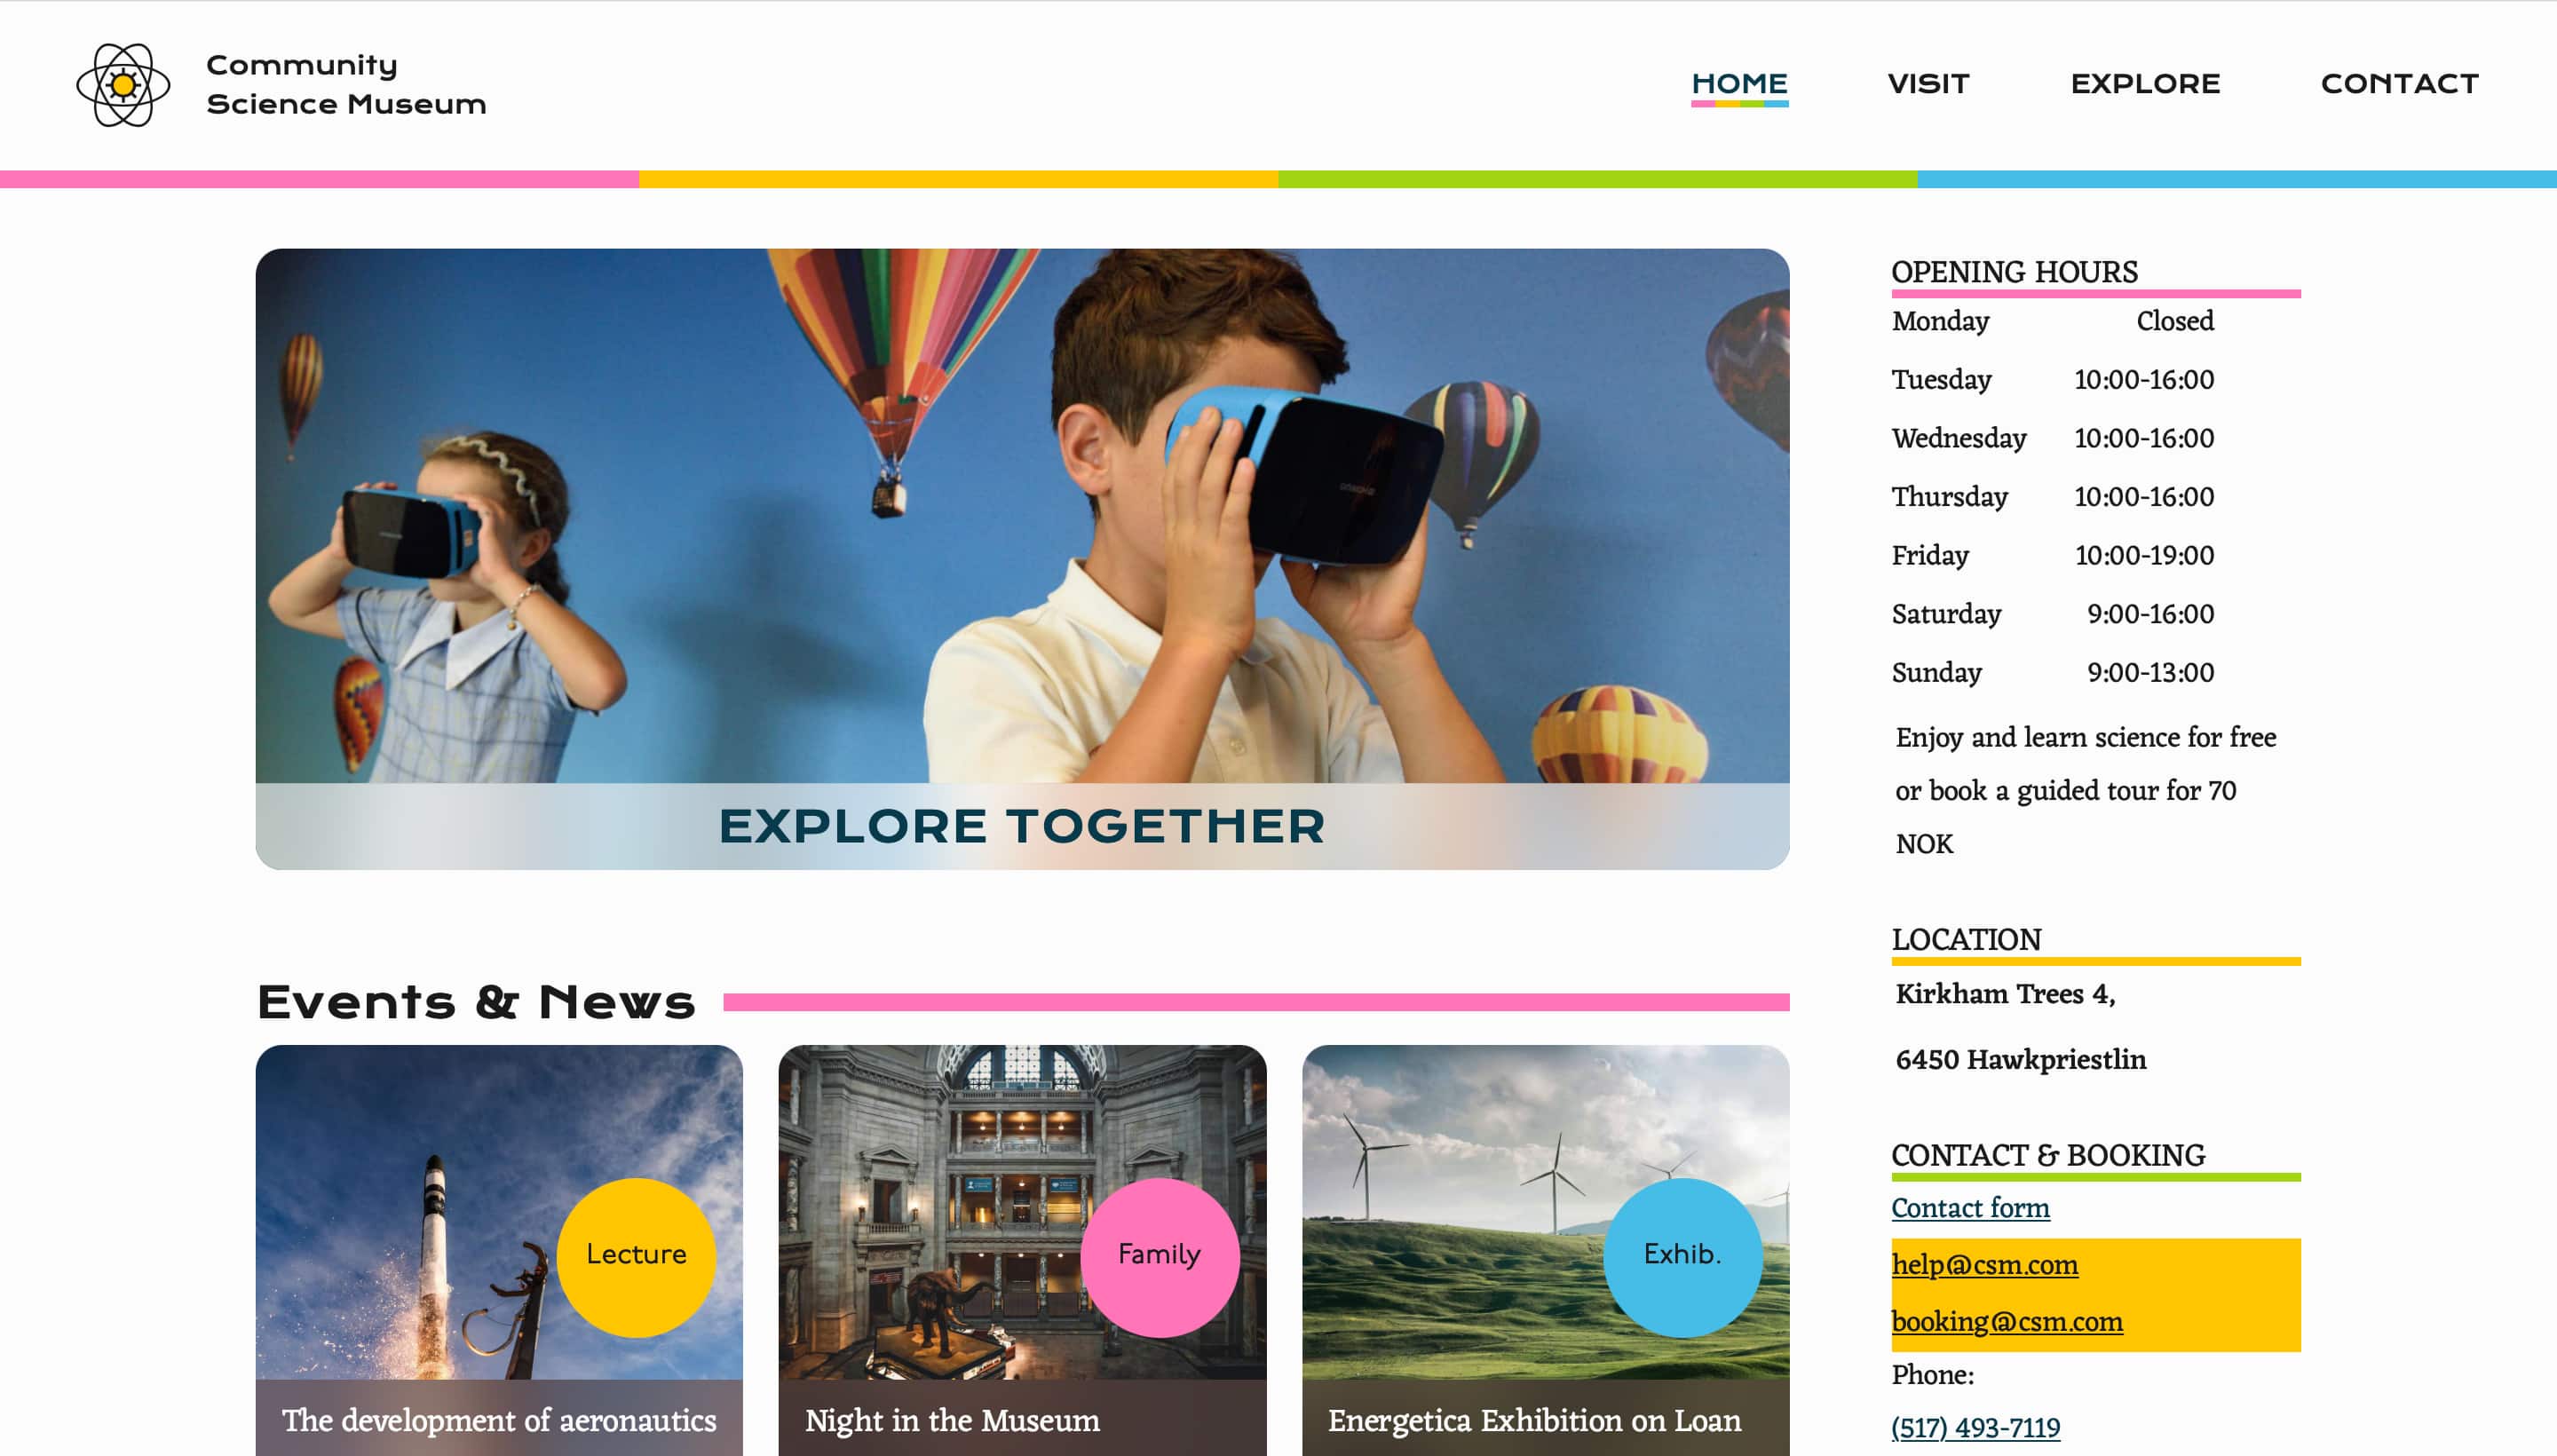 frontpage of the community science museum webpage